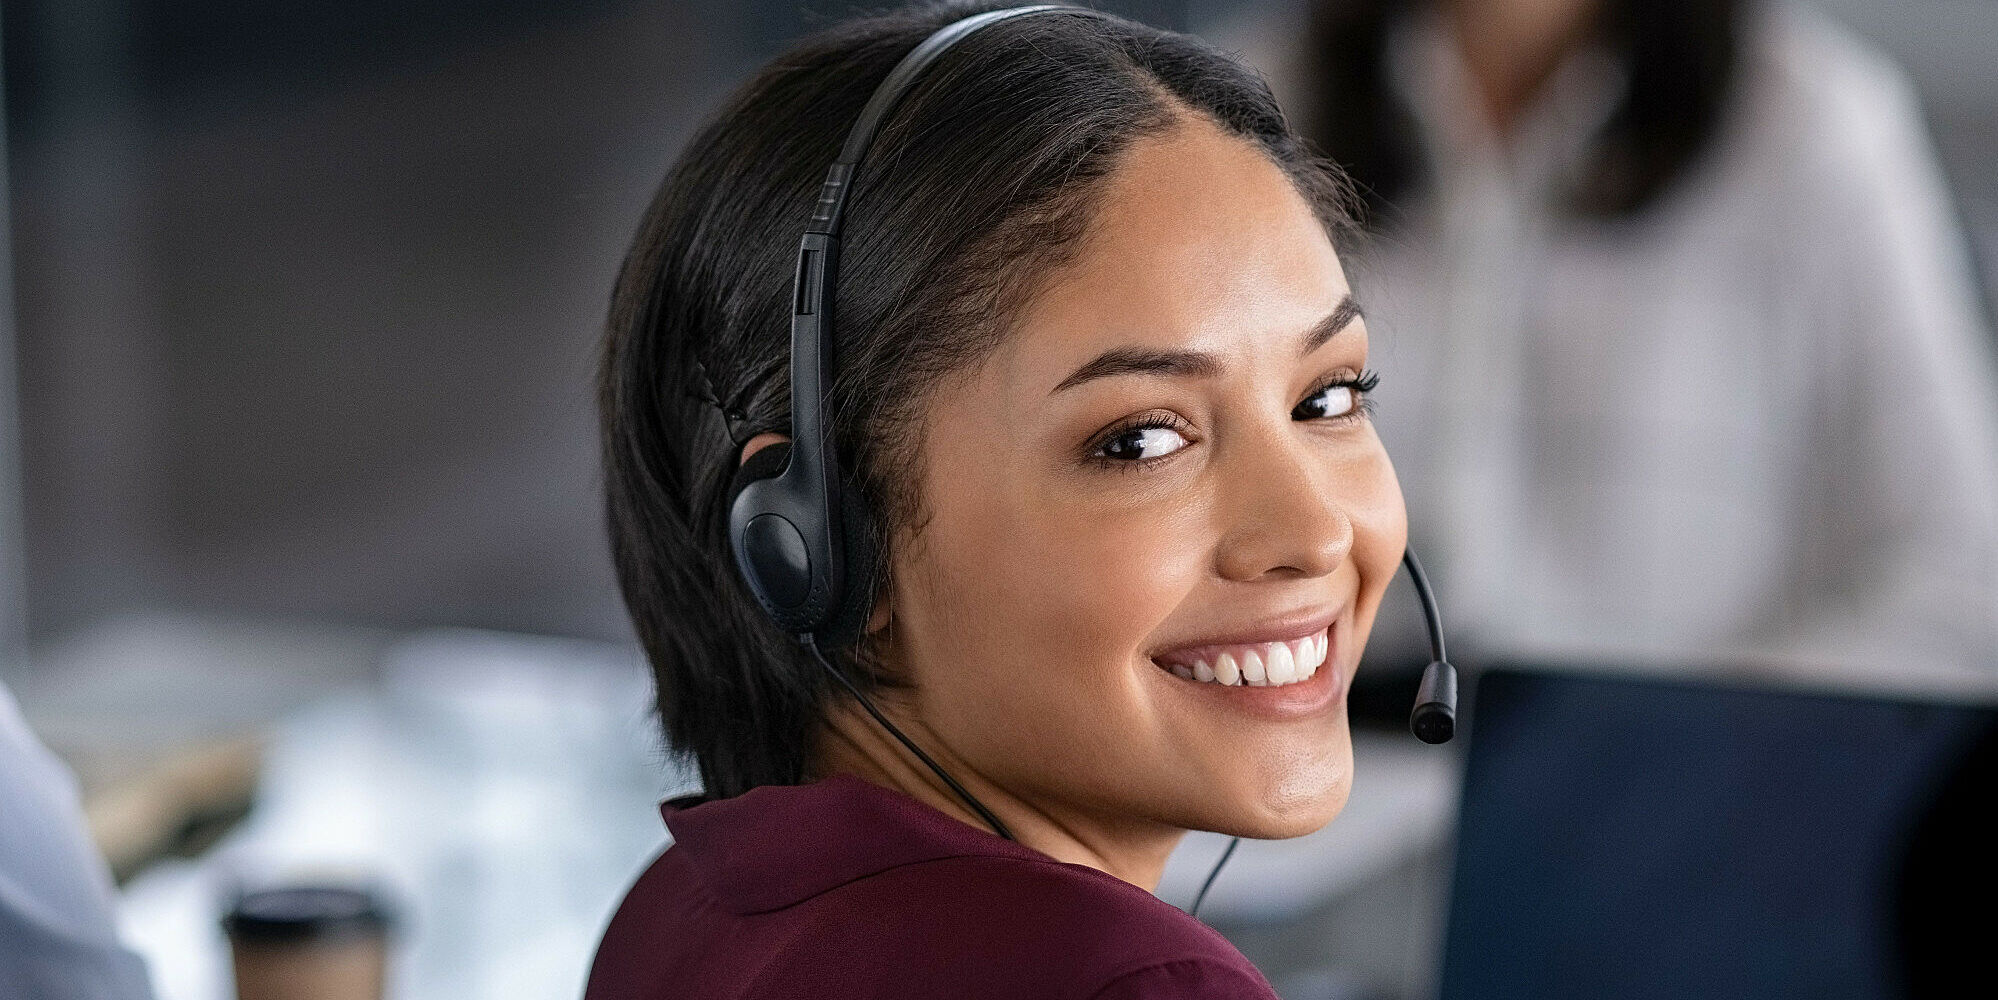 Portrait of smiling young businesswoman wearing headset in office. Portrait of a customer service agent looking at camera. Happy telephone operator latin girl with headset working at computer.